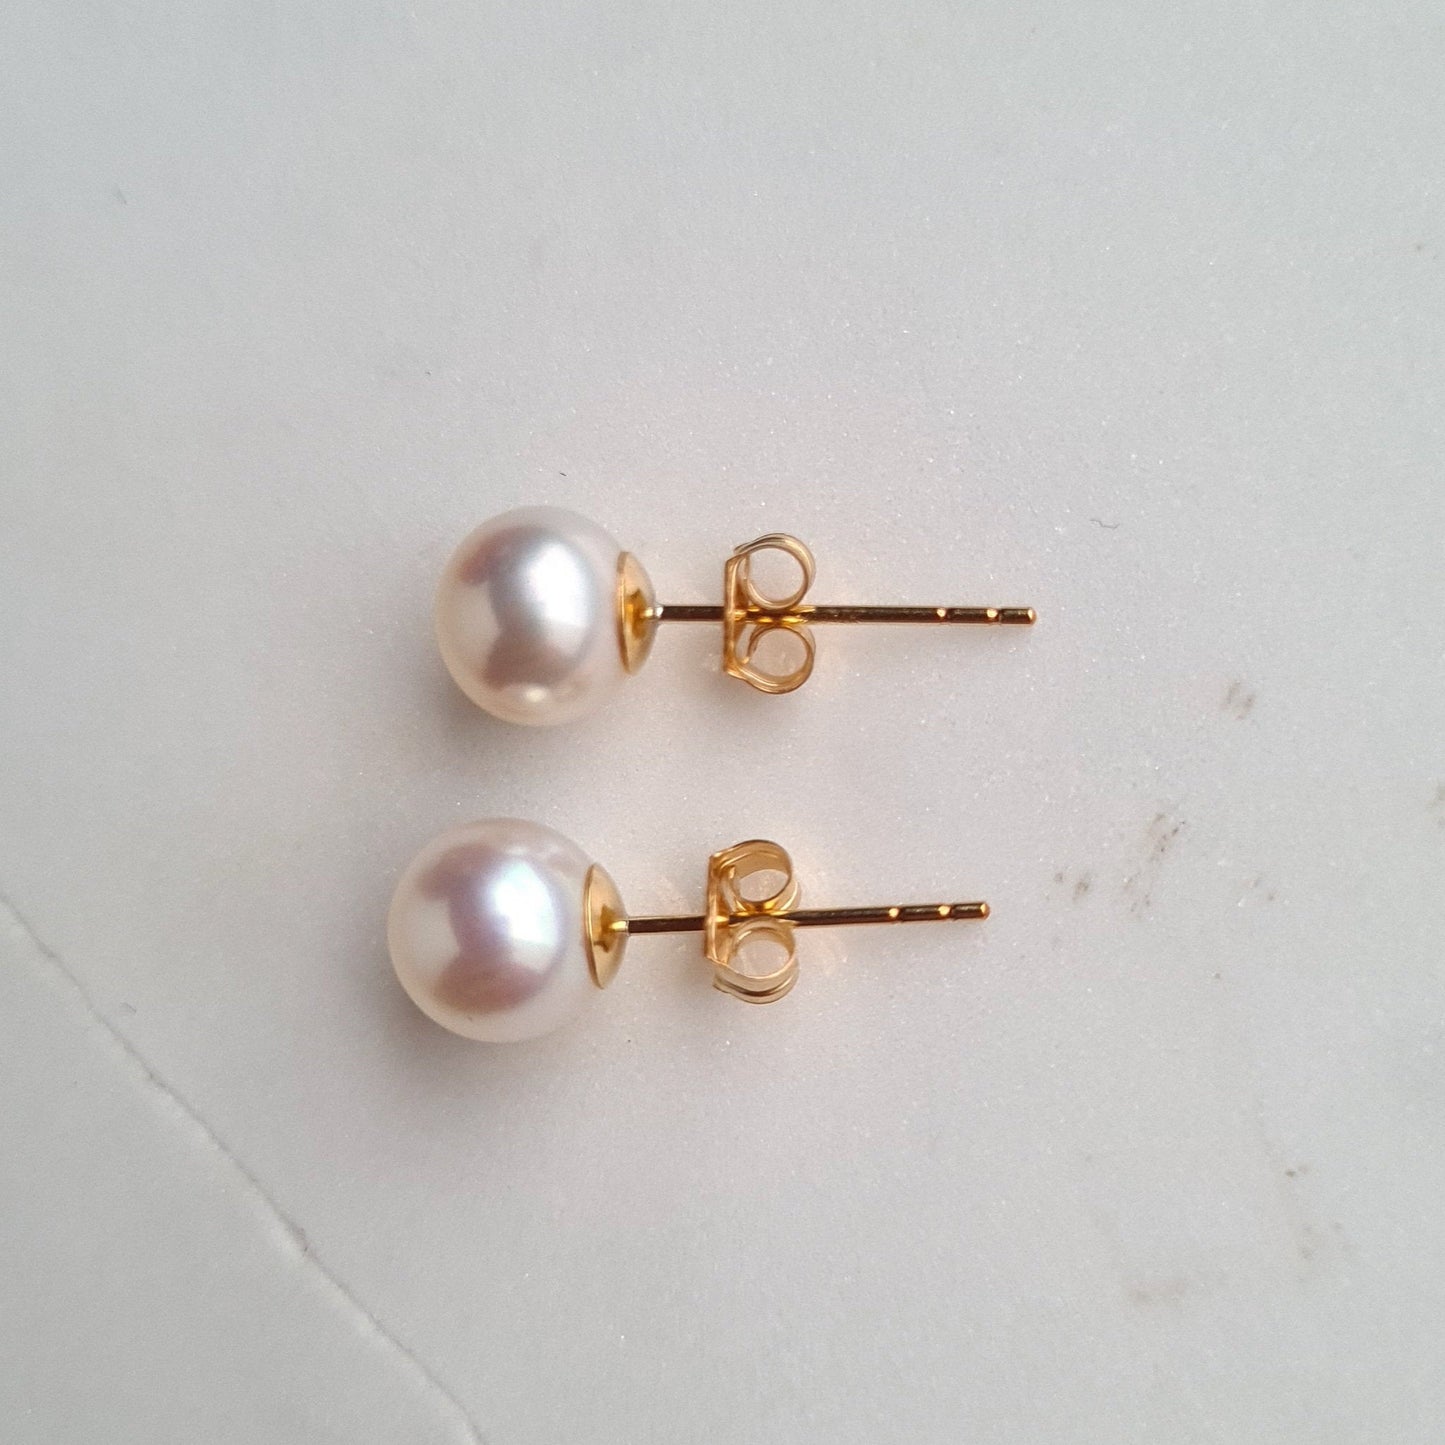 AAA quality 7.5 to 8 mm Almost Round Fresh Water Pearl with Gold filled Ear Stud - White